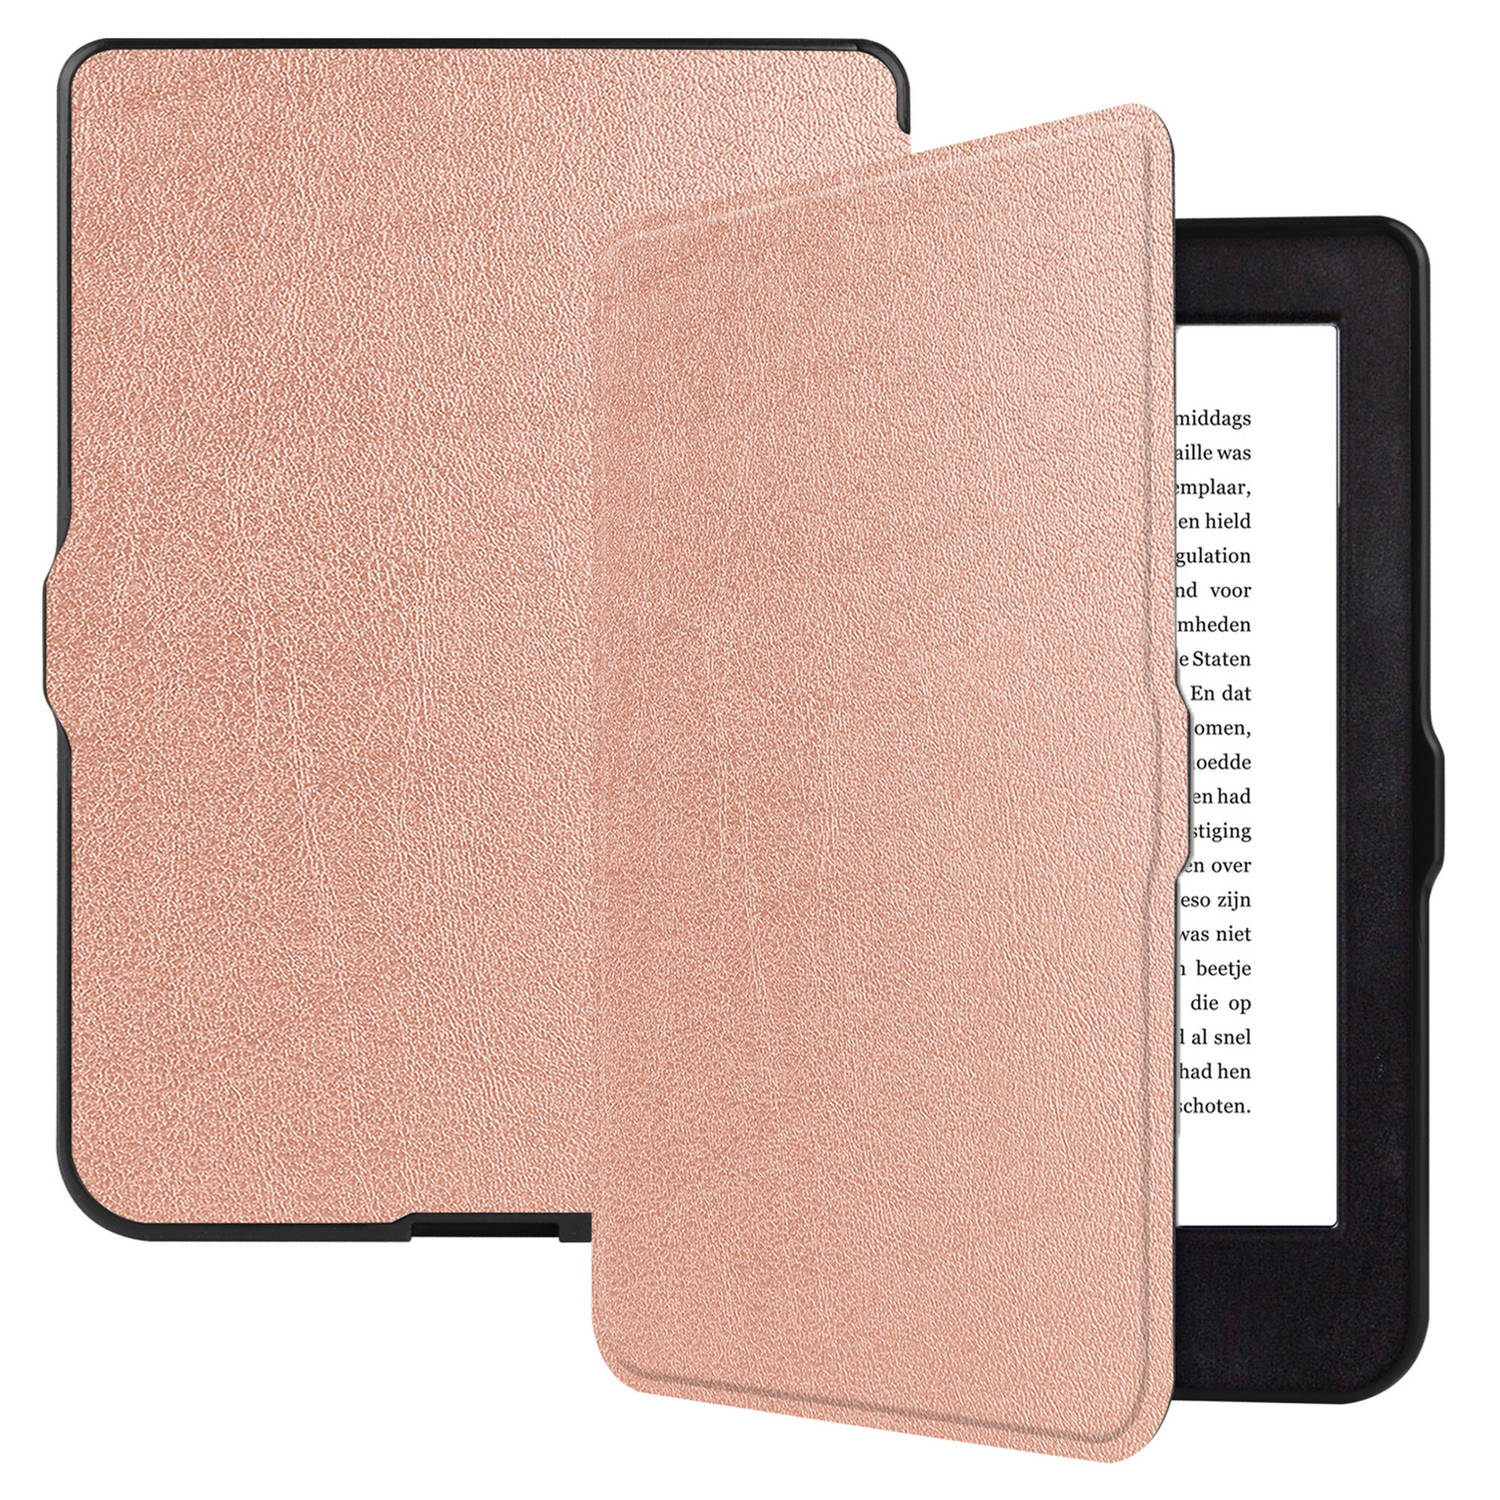 Basey Kobo Nia Hoesje Bookcase Cover Hoes - Kobo Nia Case Cover Hoes - Rosé Goud